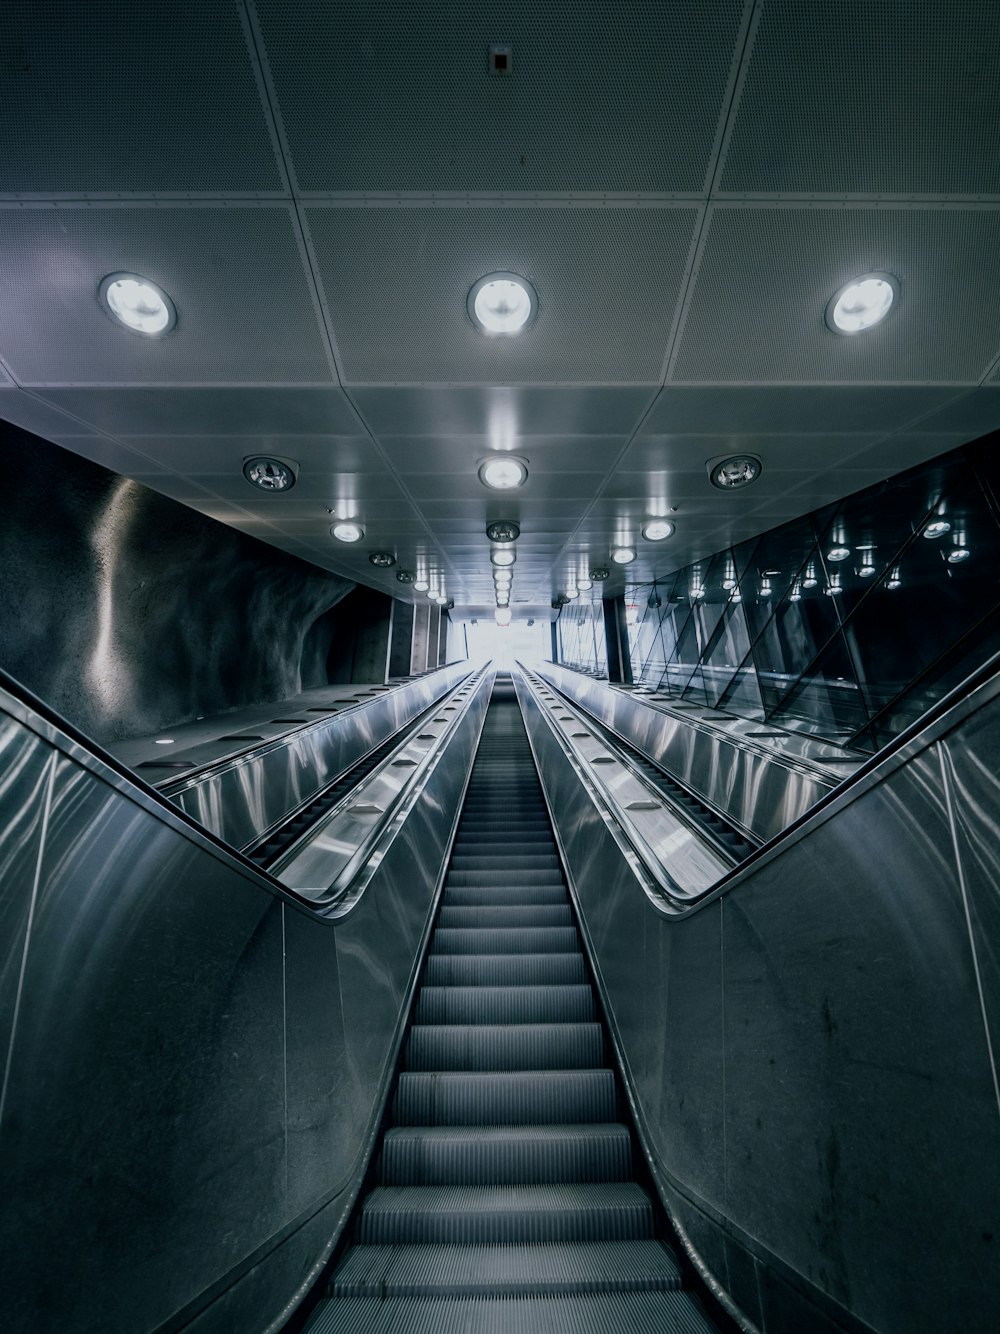 gray and black escalator in a building